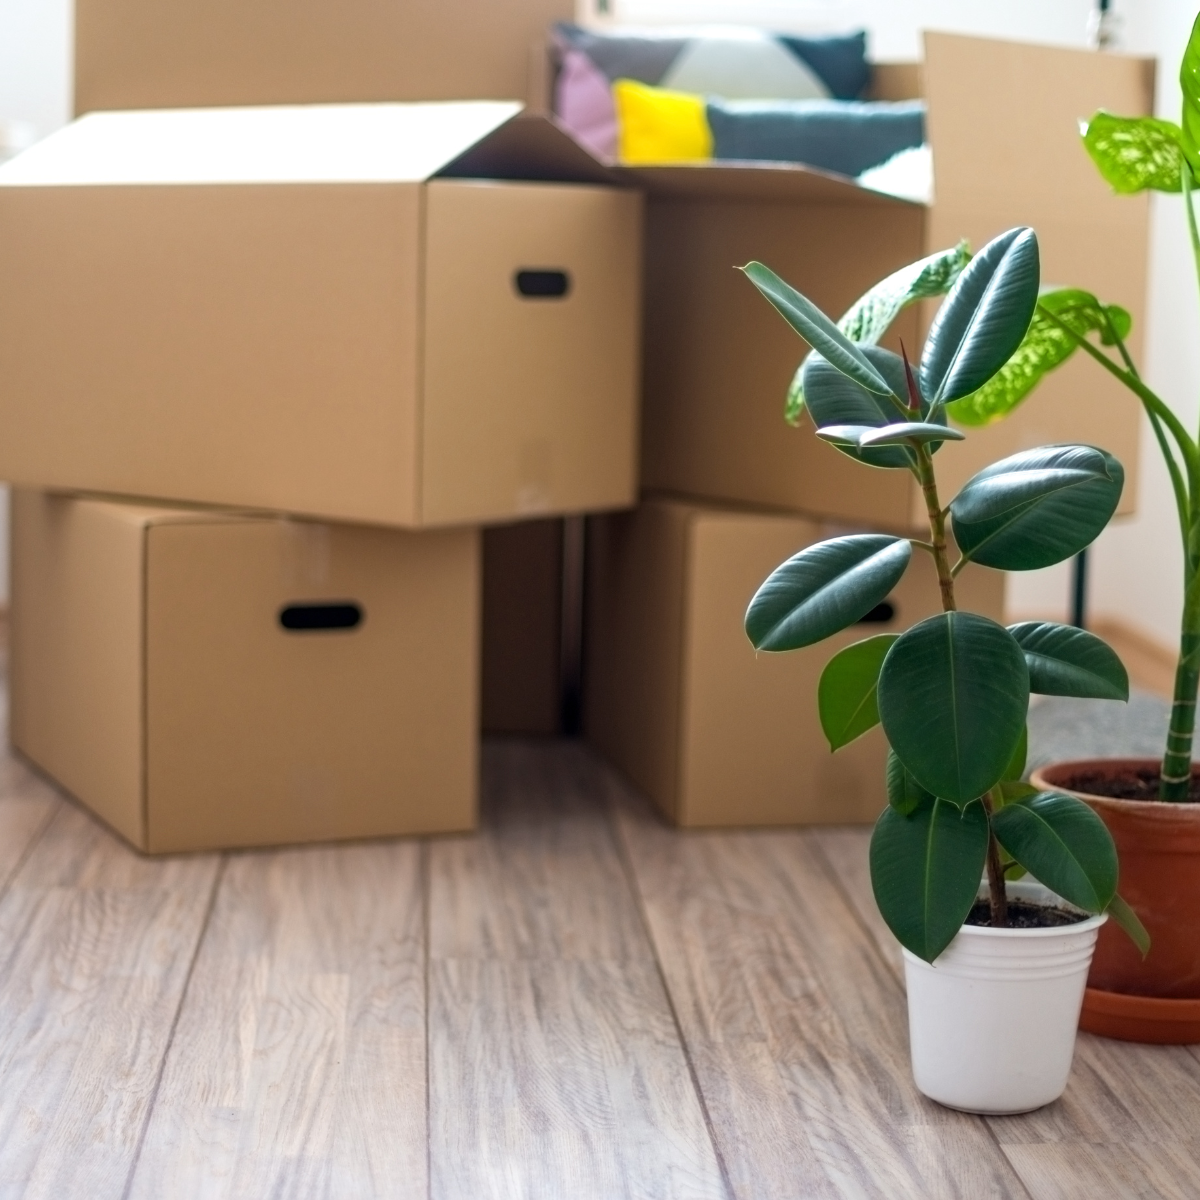 8 Benefits of Hiring a Full-Service Moving Company